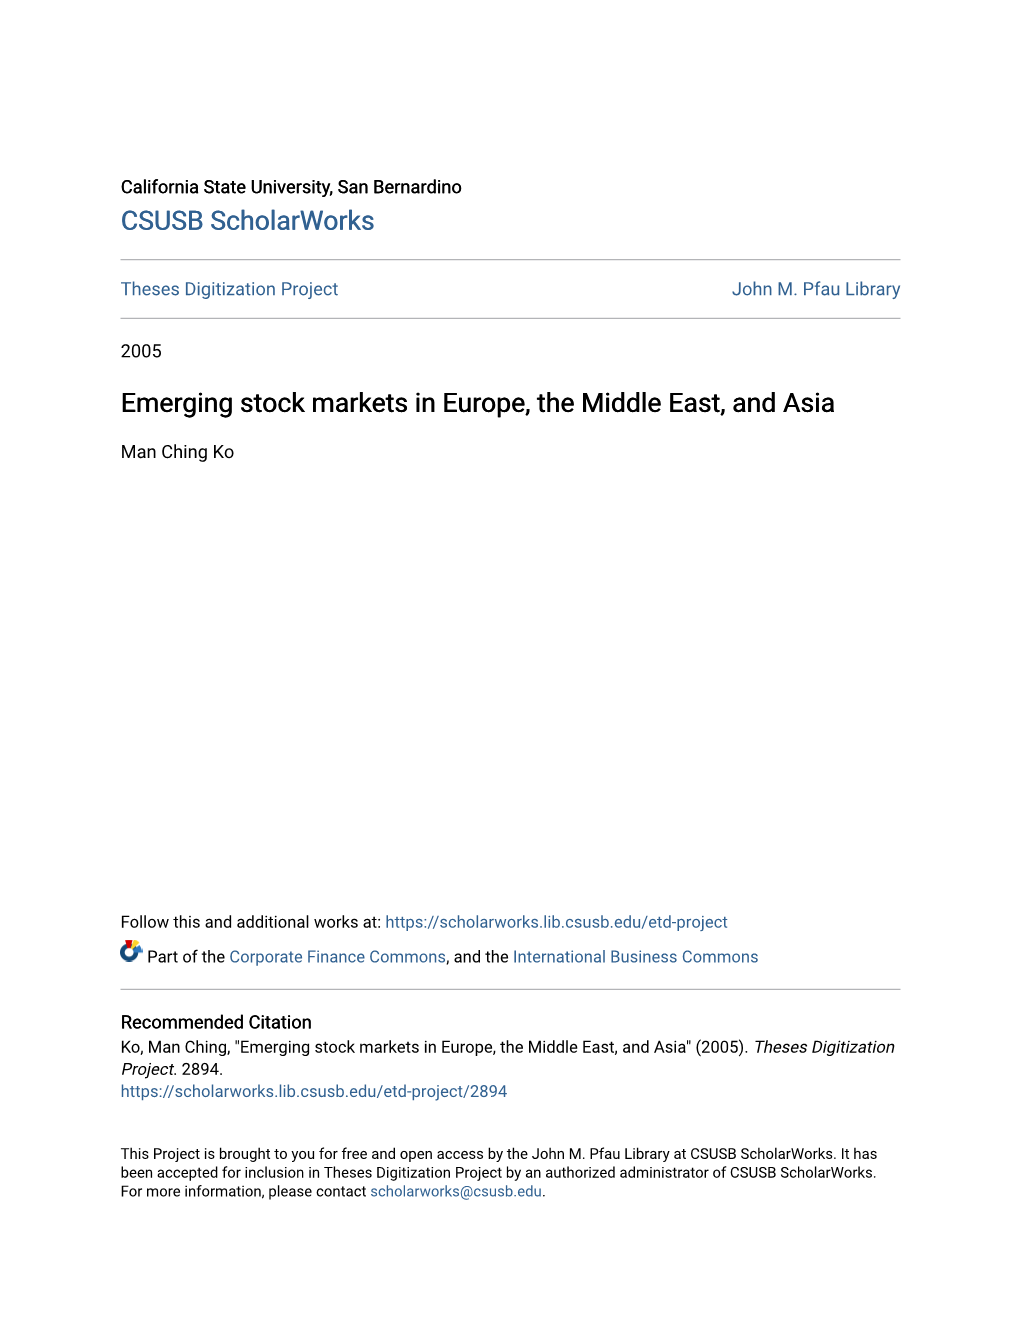 Emerging Stock Markets in Europe, the Middle East, and Asia